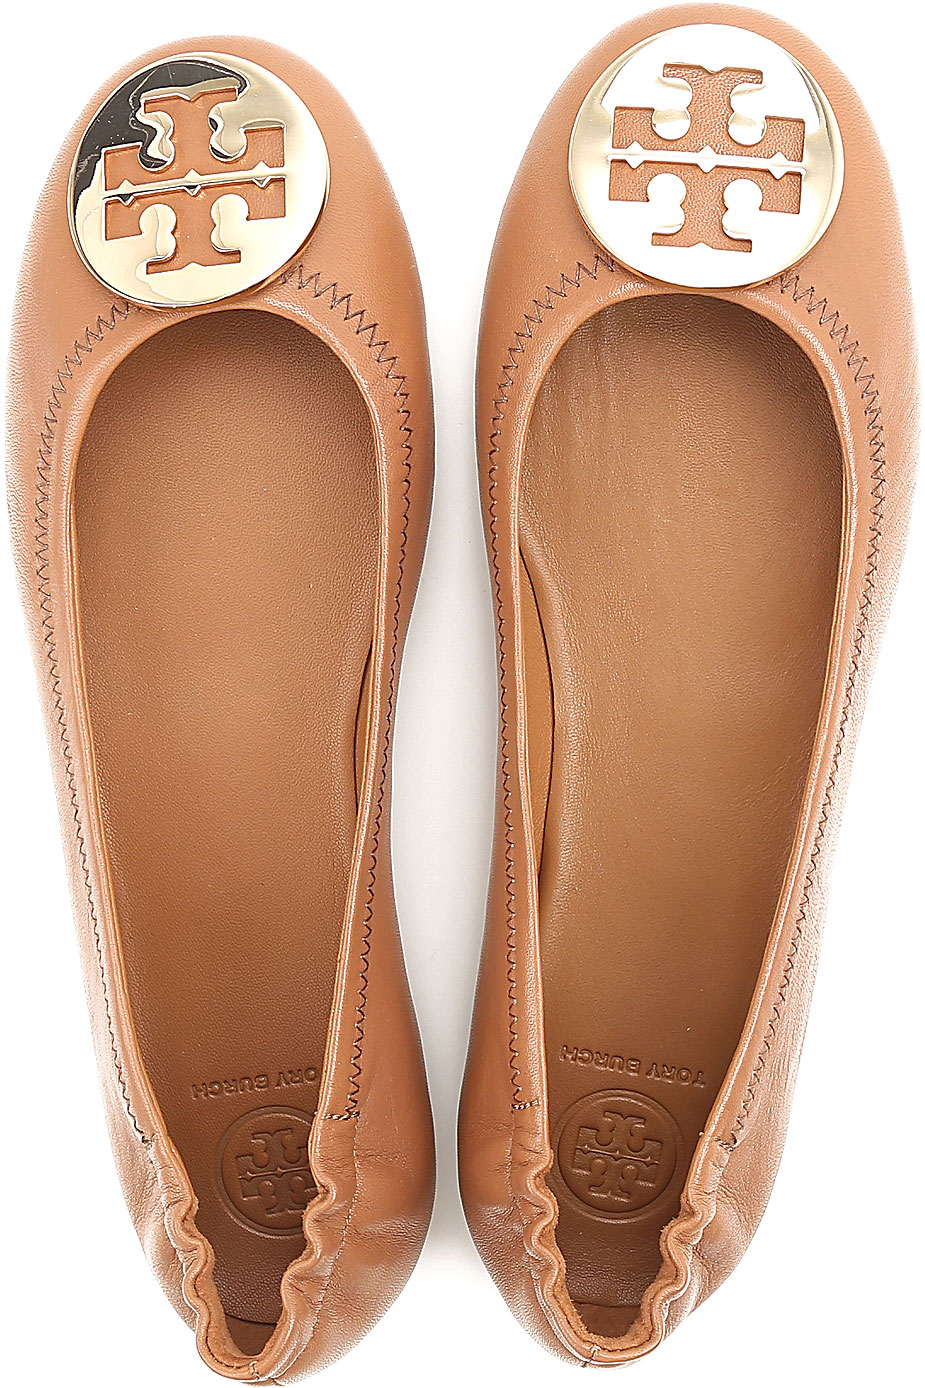 Womens Shoes Tory Burch, Style code: 32880-232-